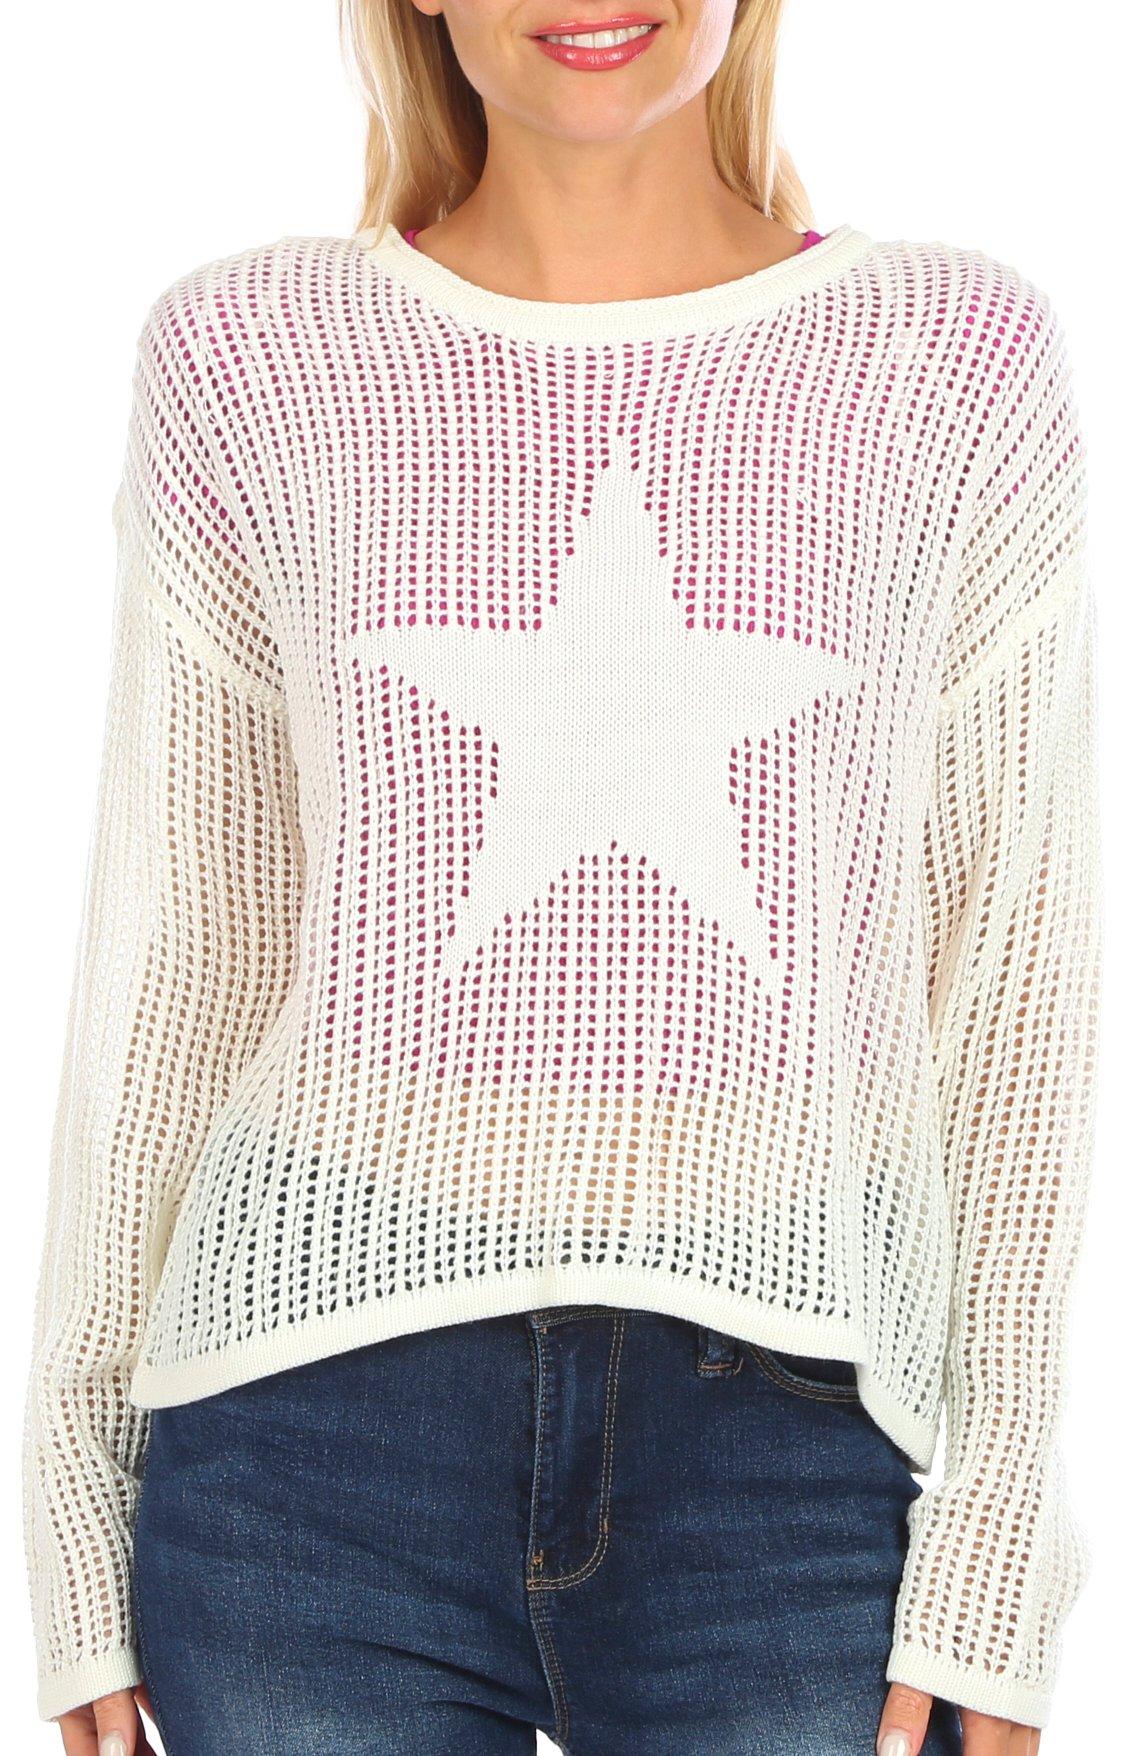 No Comment Juniors Star Pull-On Crochet Long Sleeve